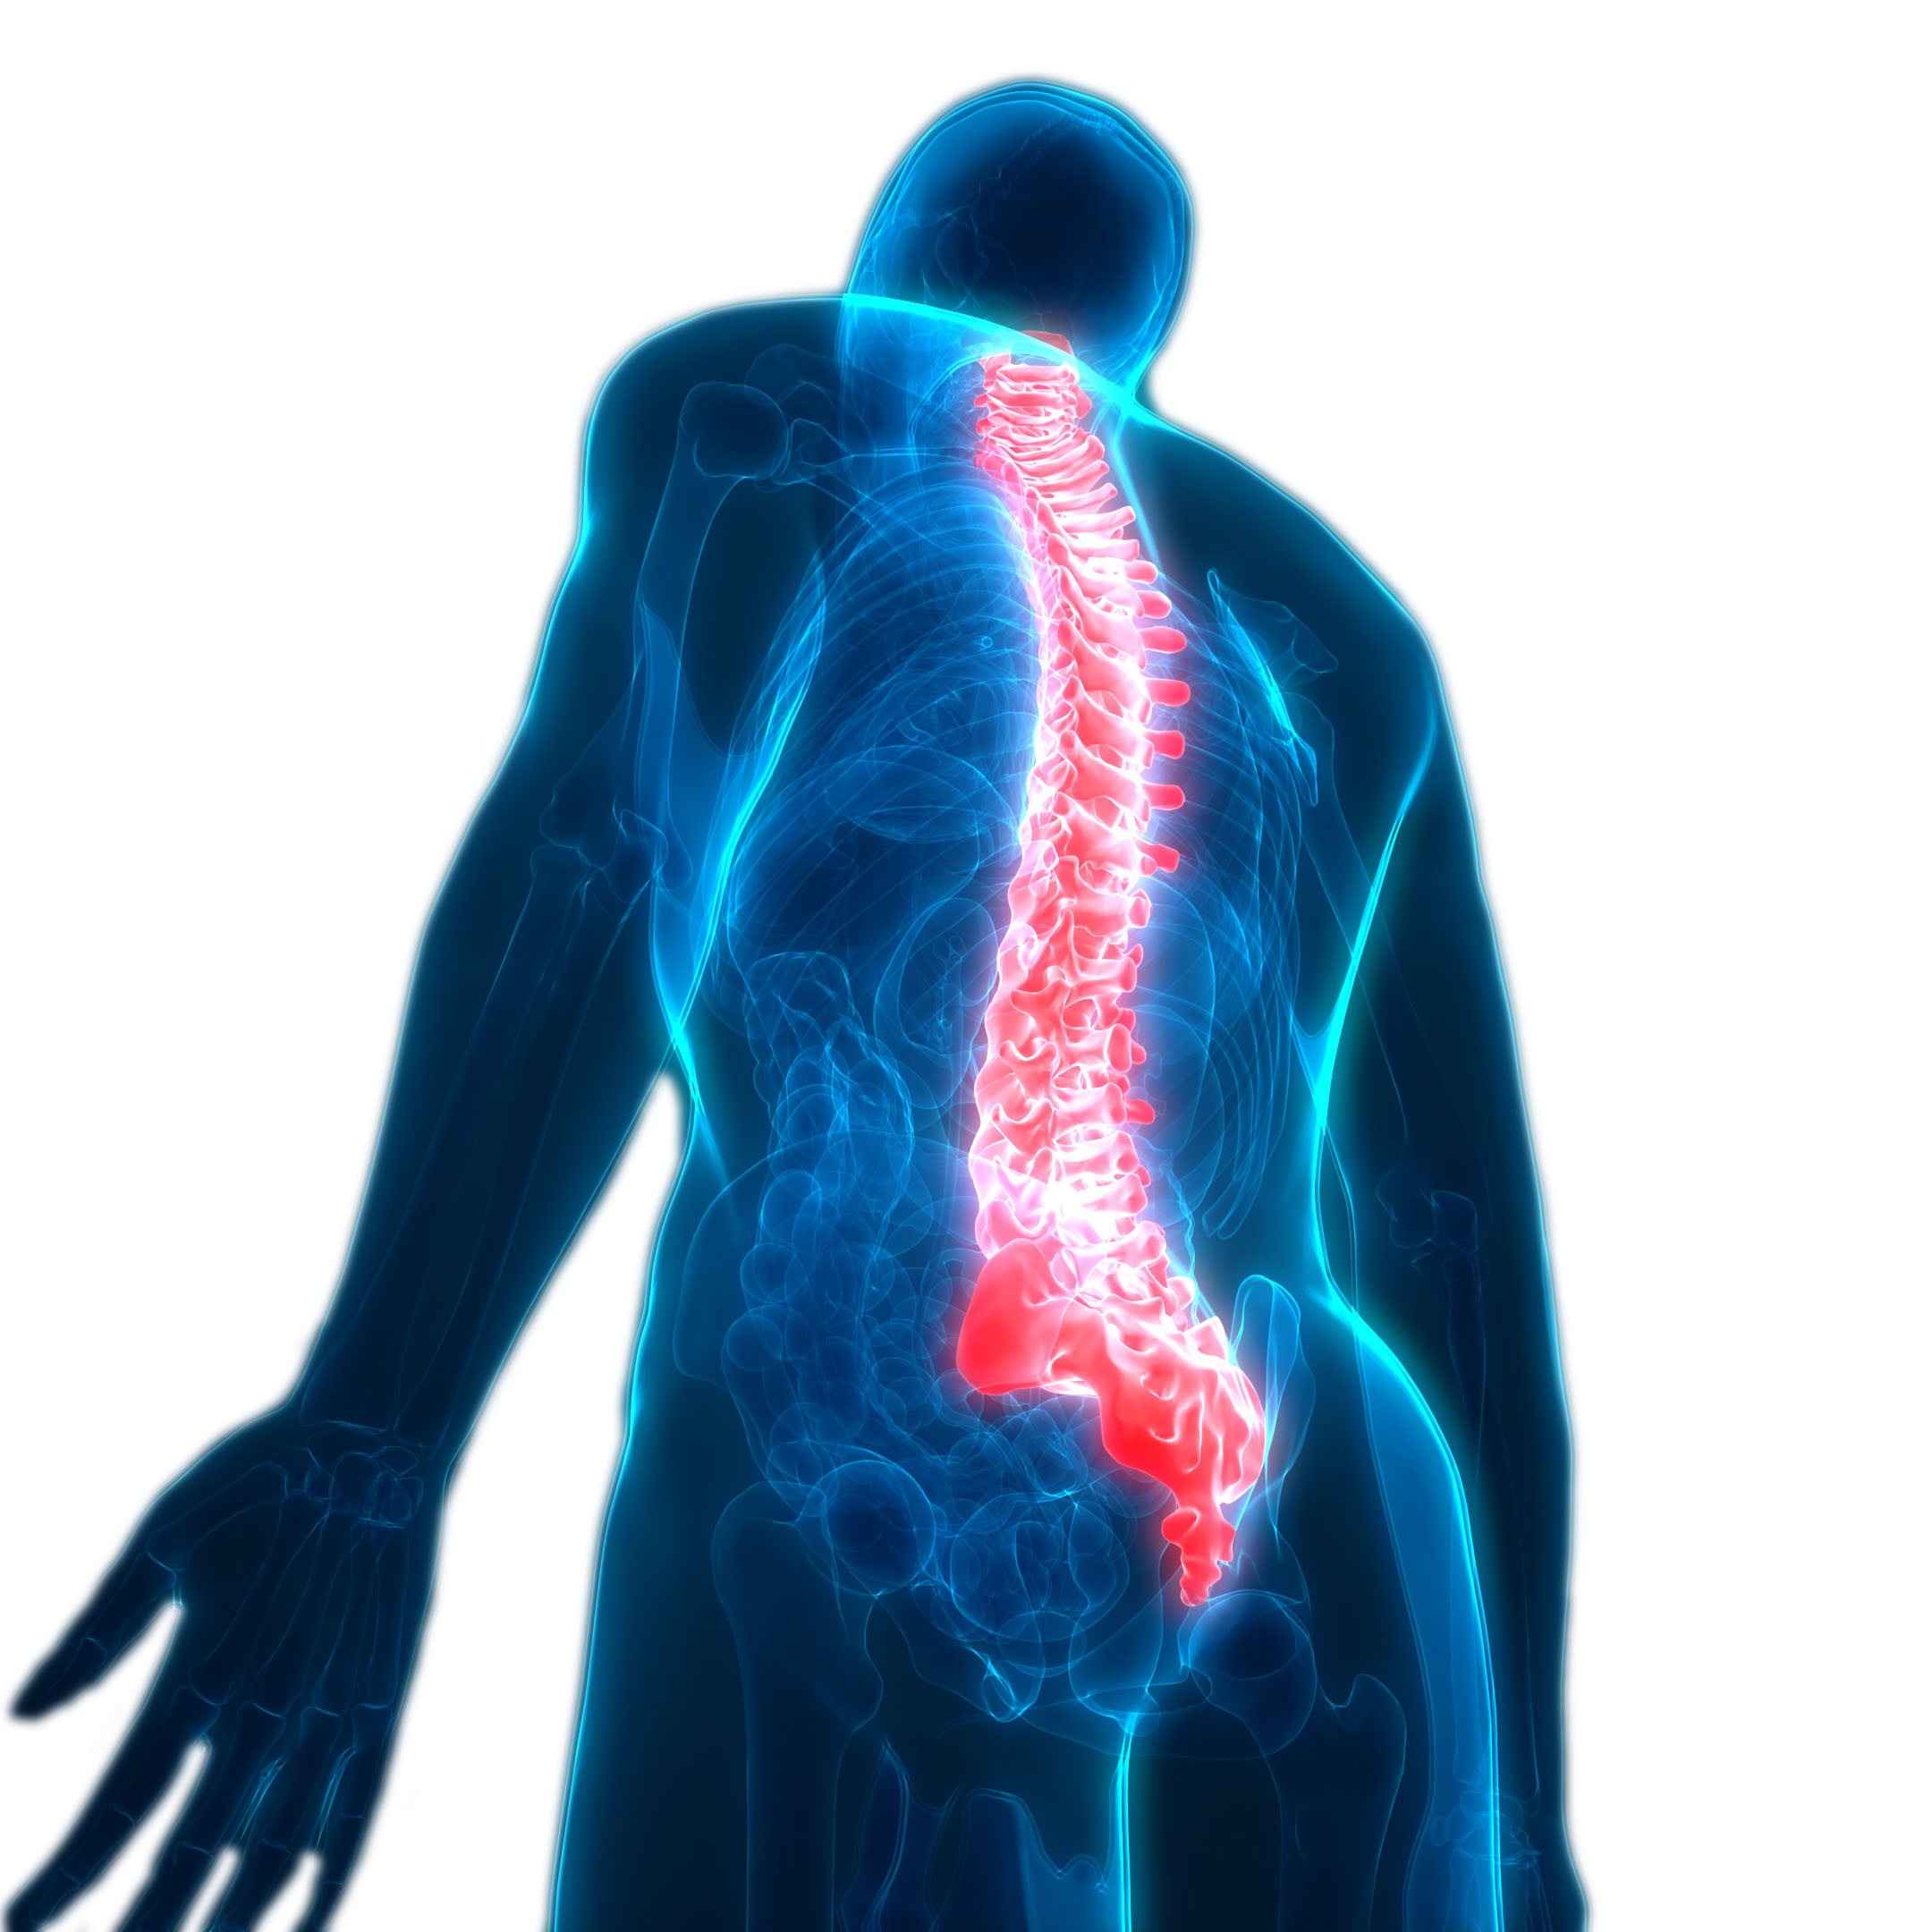 An artist rendering shows the outline of a person with their bone structure illuminated blue and their spine red.